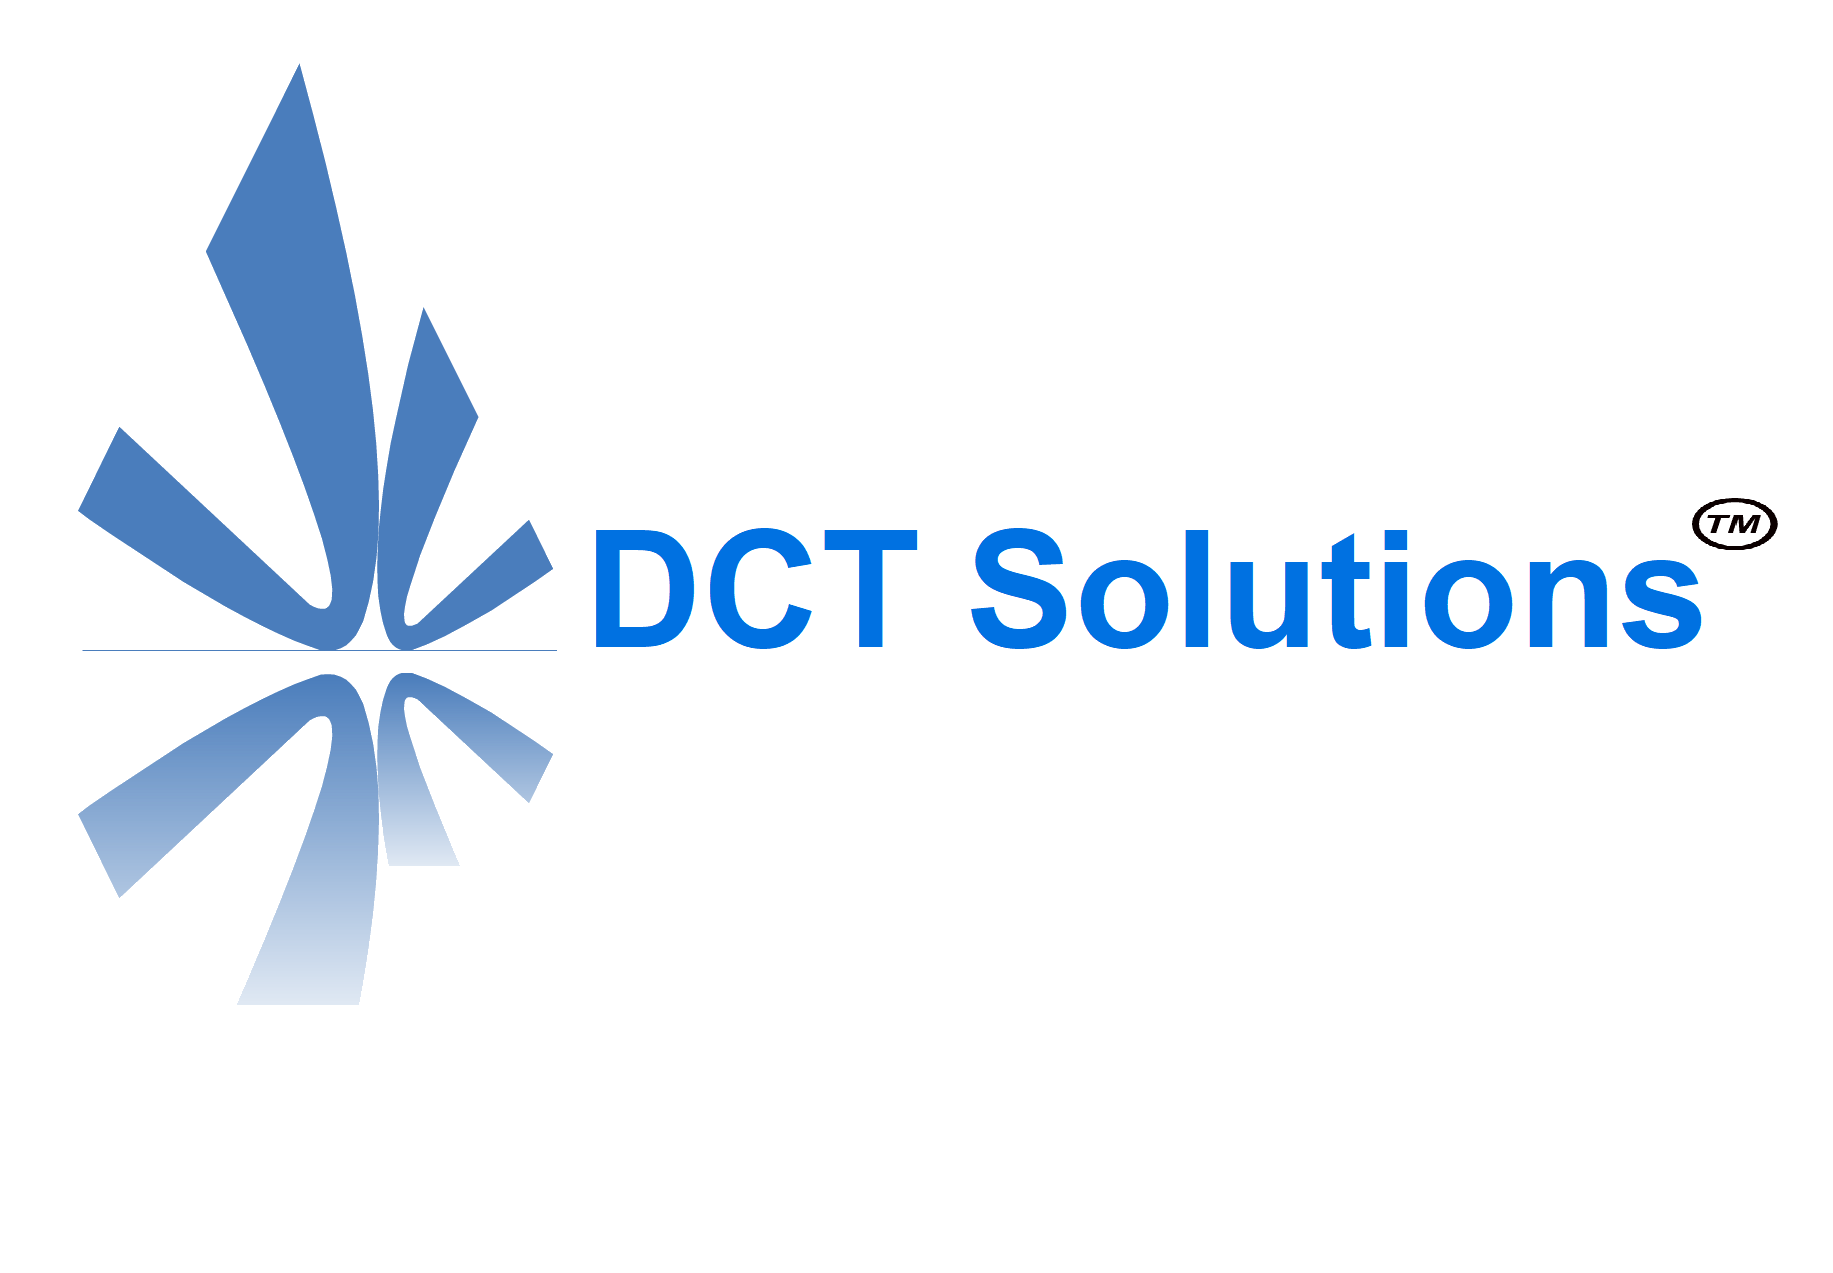 DCT Solutions